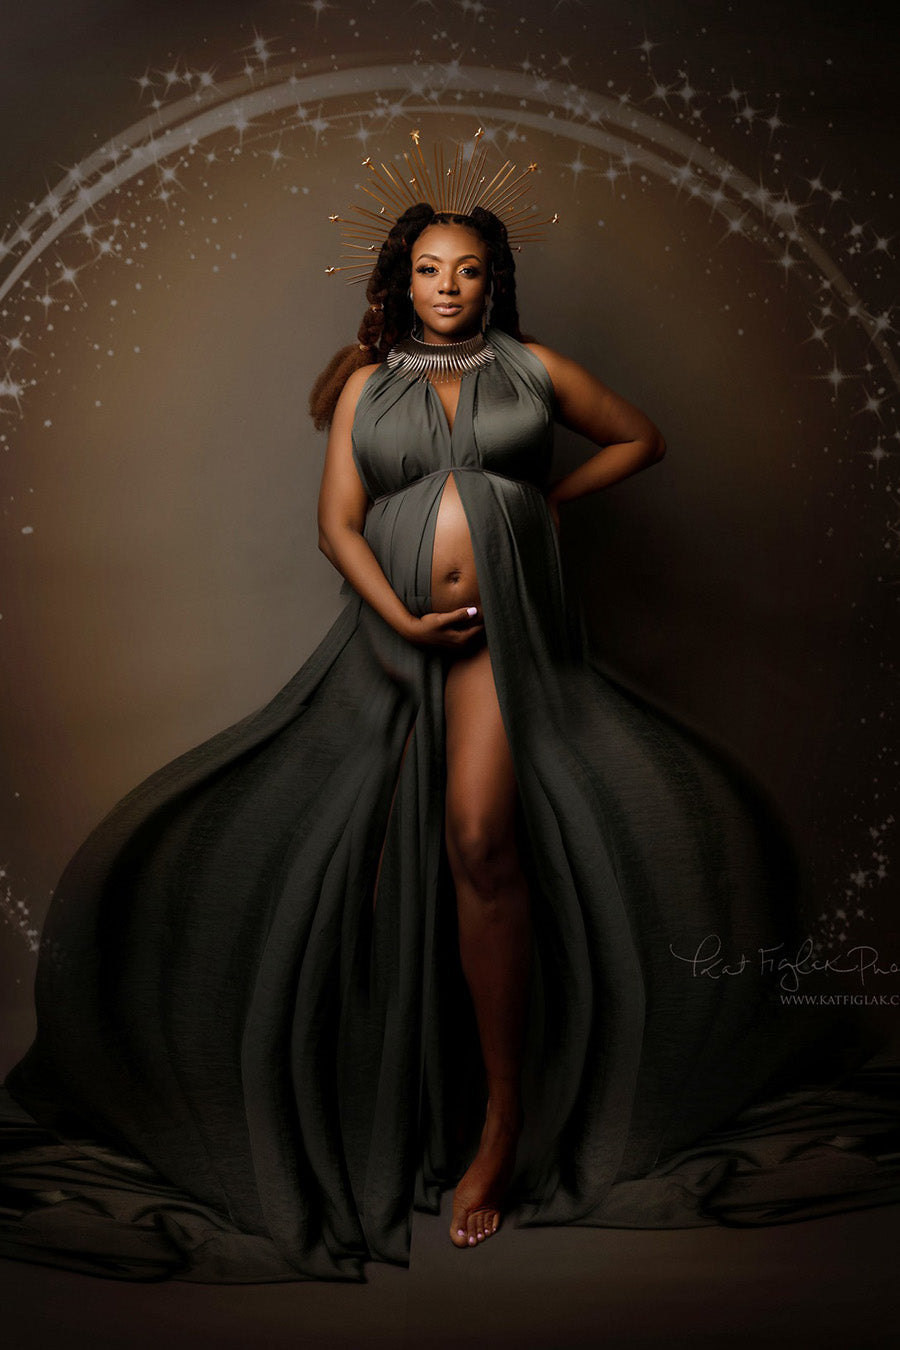 pregnant model poses against a brown background with stars. she is wearing a slategrey silky scarf wrapped around her body as a dress. she has a crown and a big necklace to match the style. 